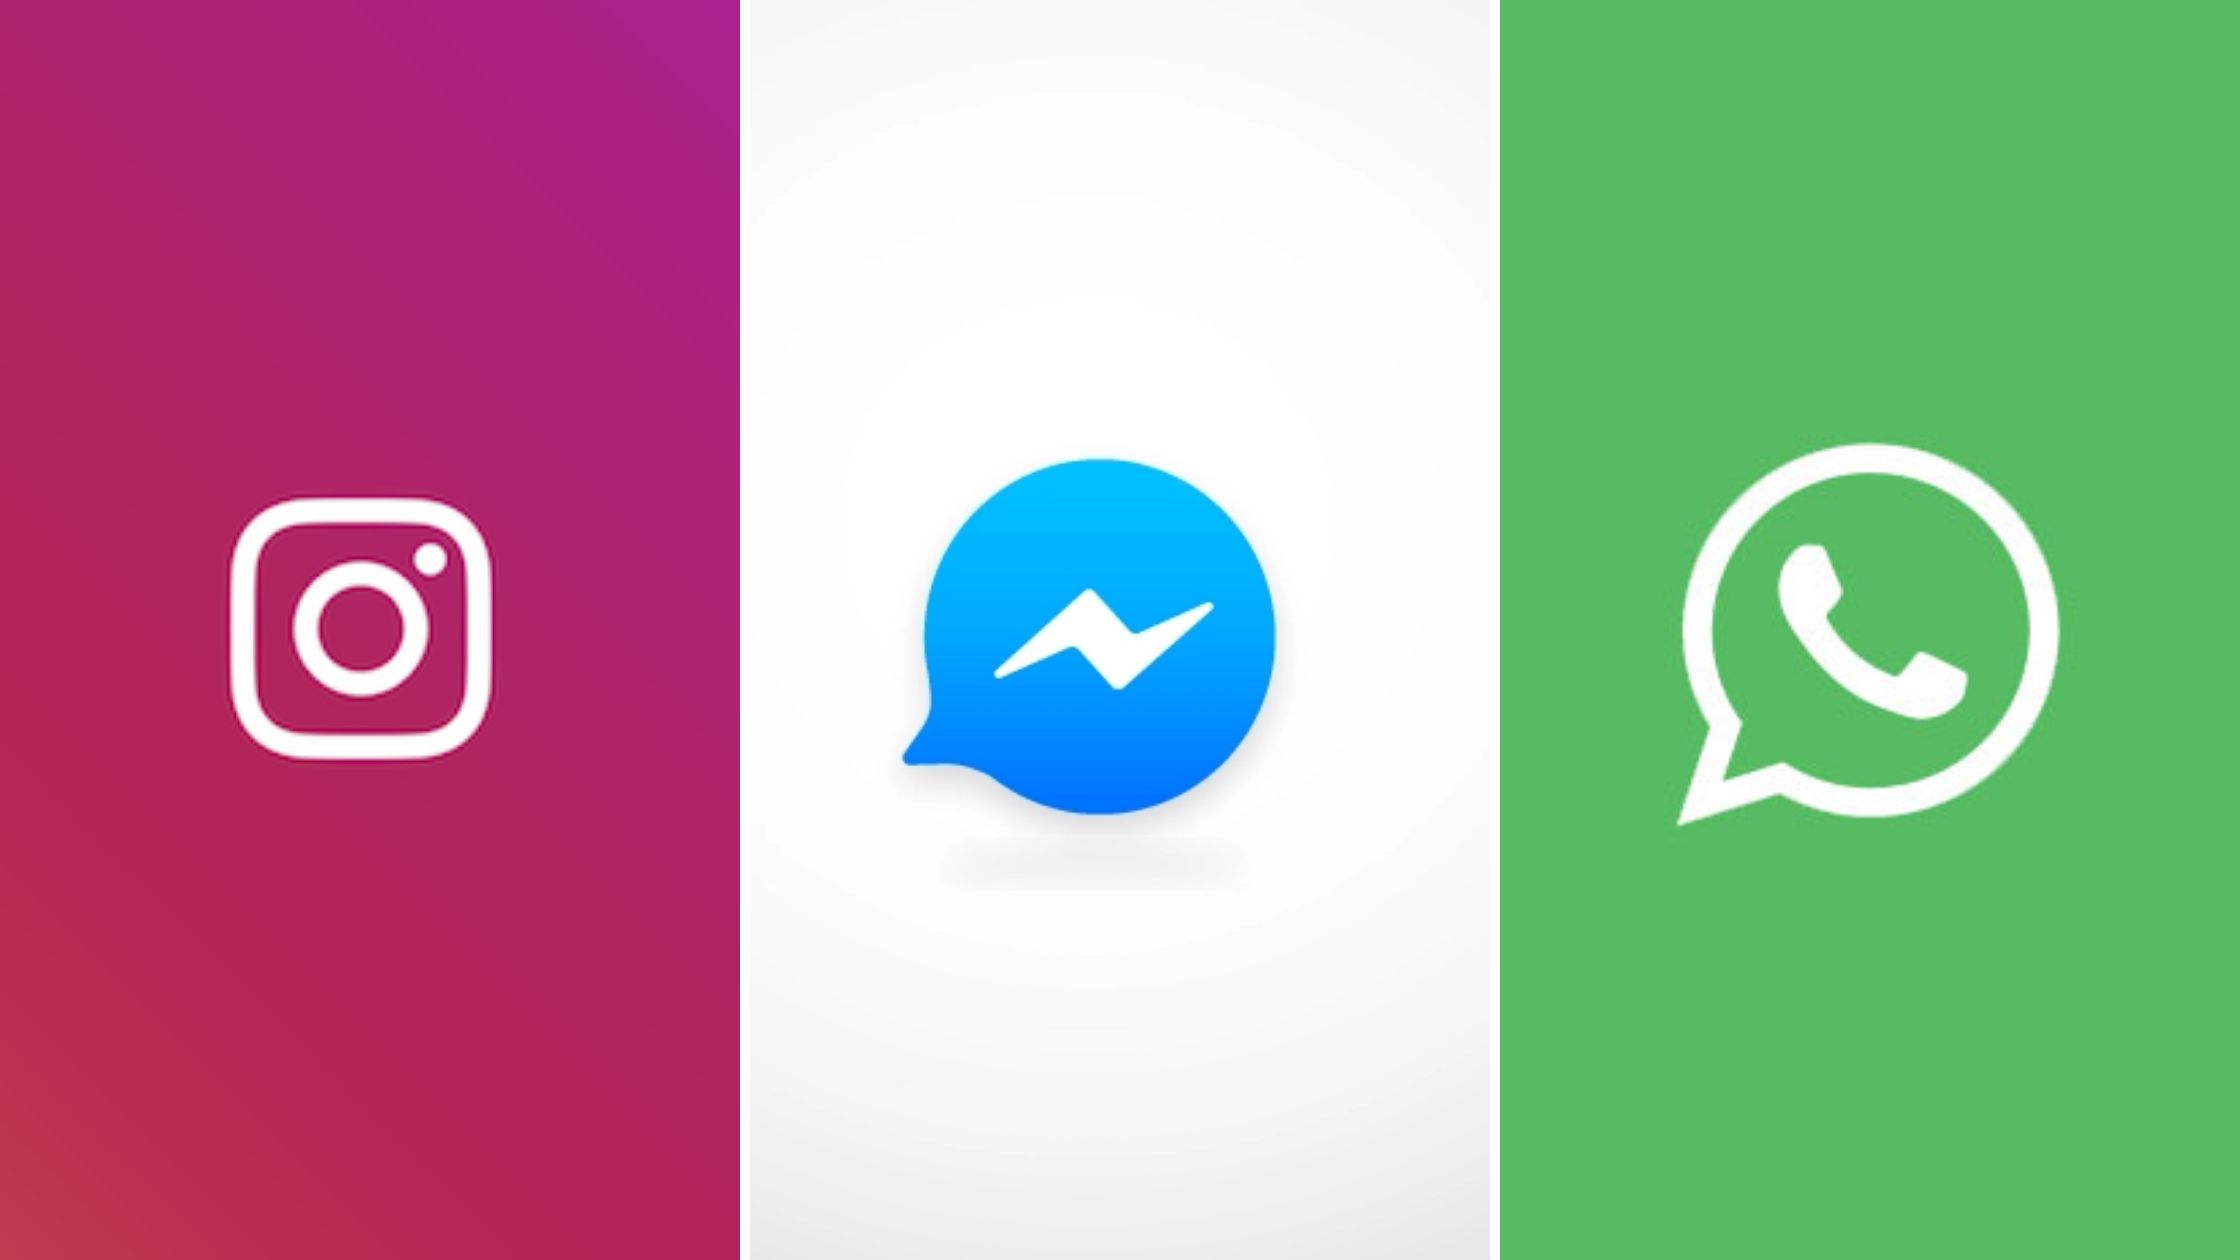 Facebook plans to merge Whatsapp, Instagram and Messenger